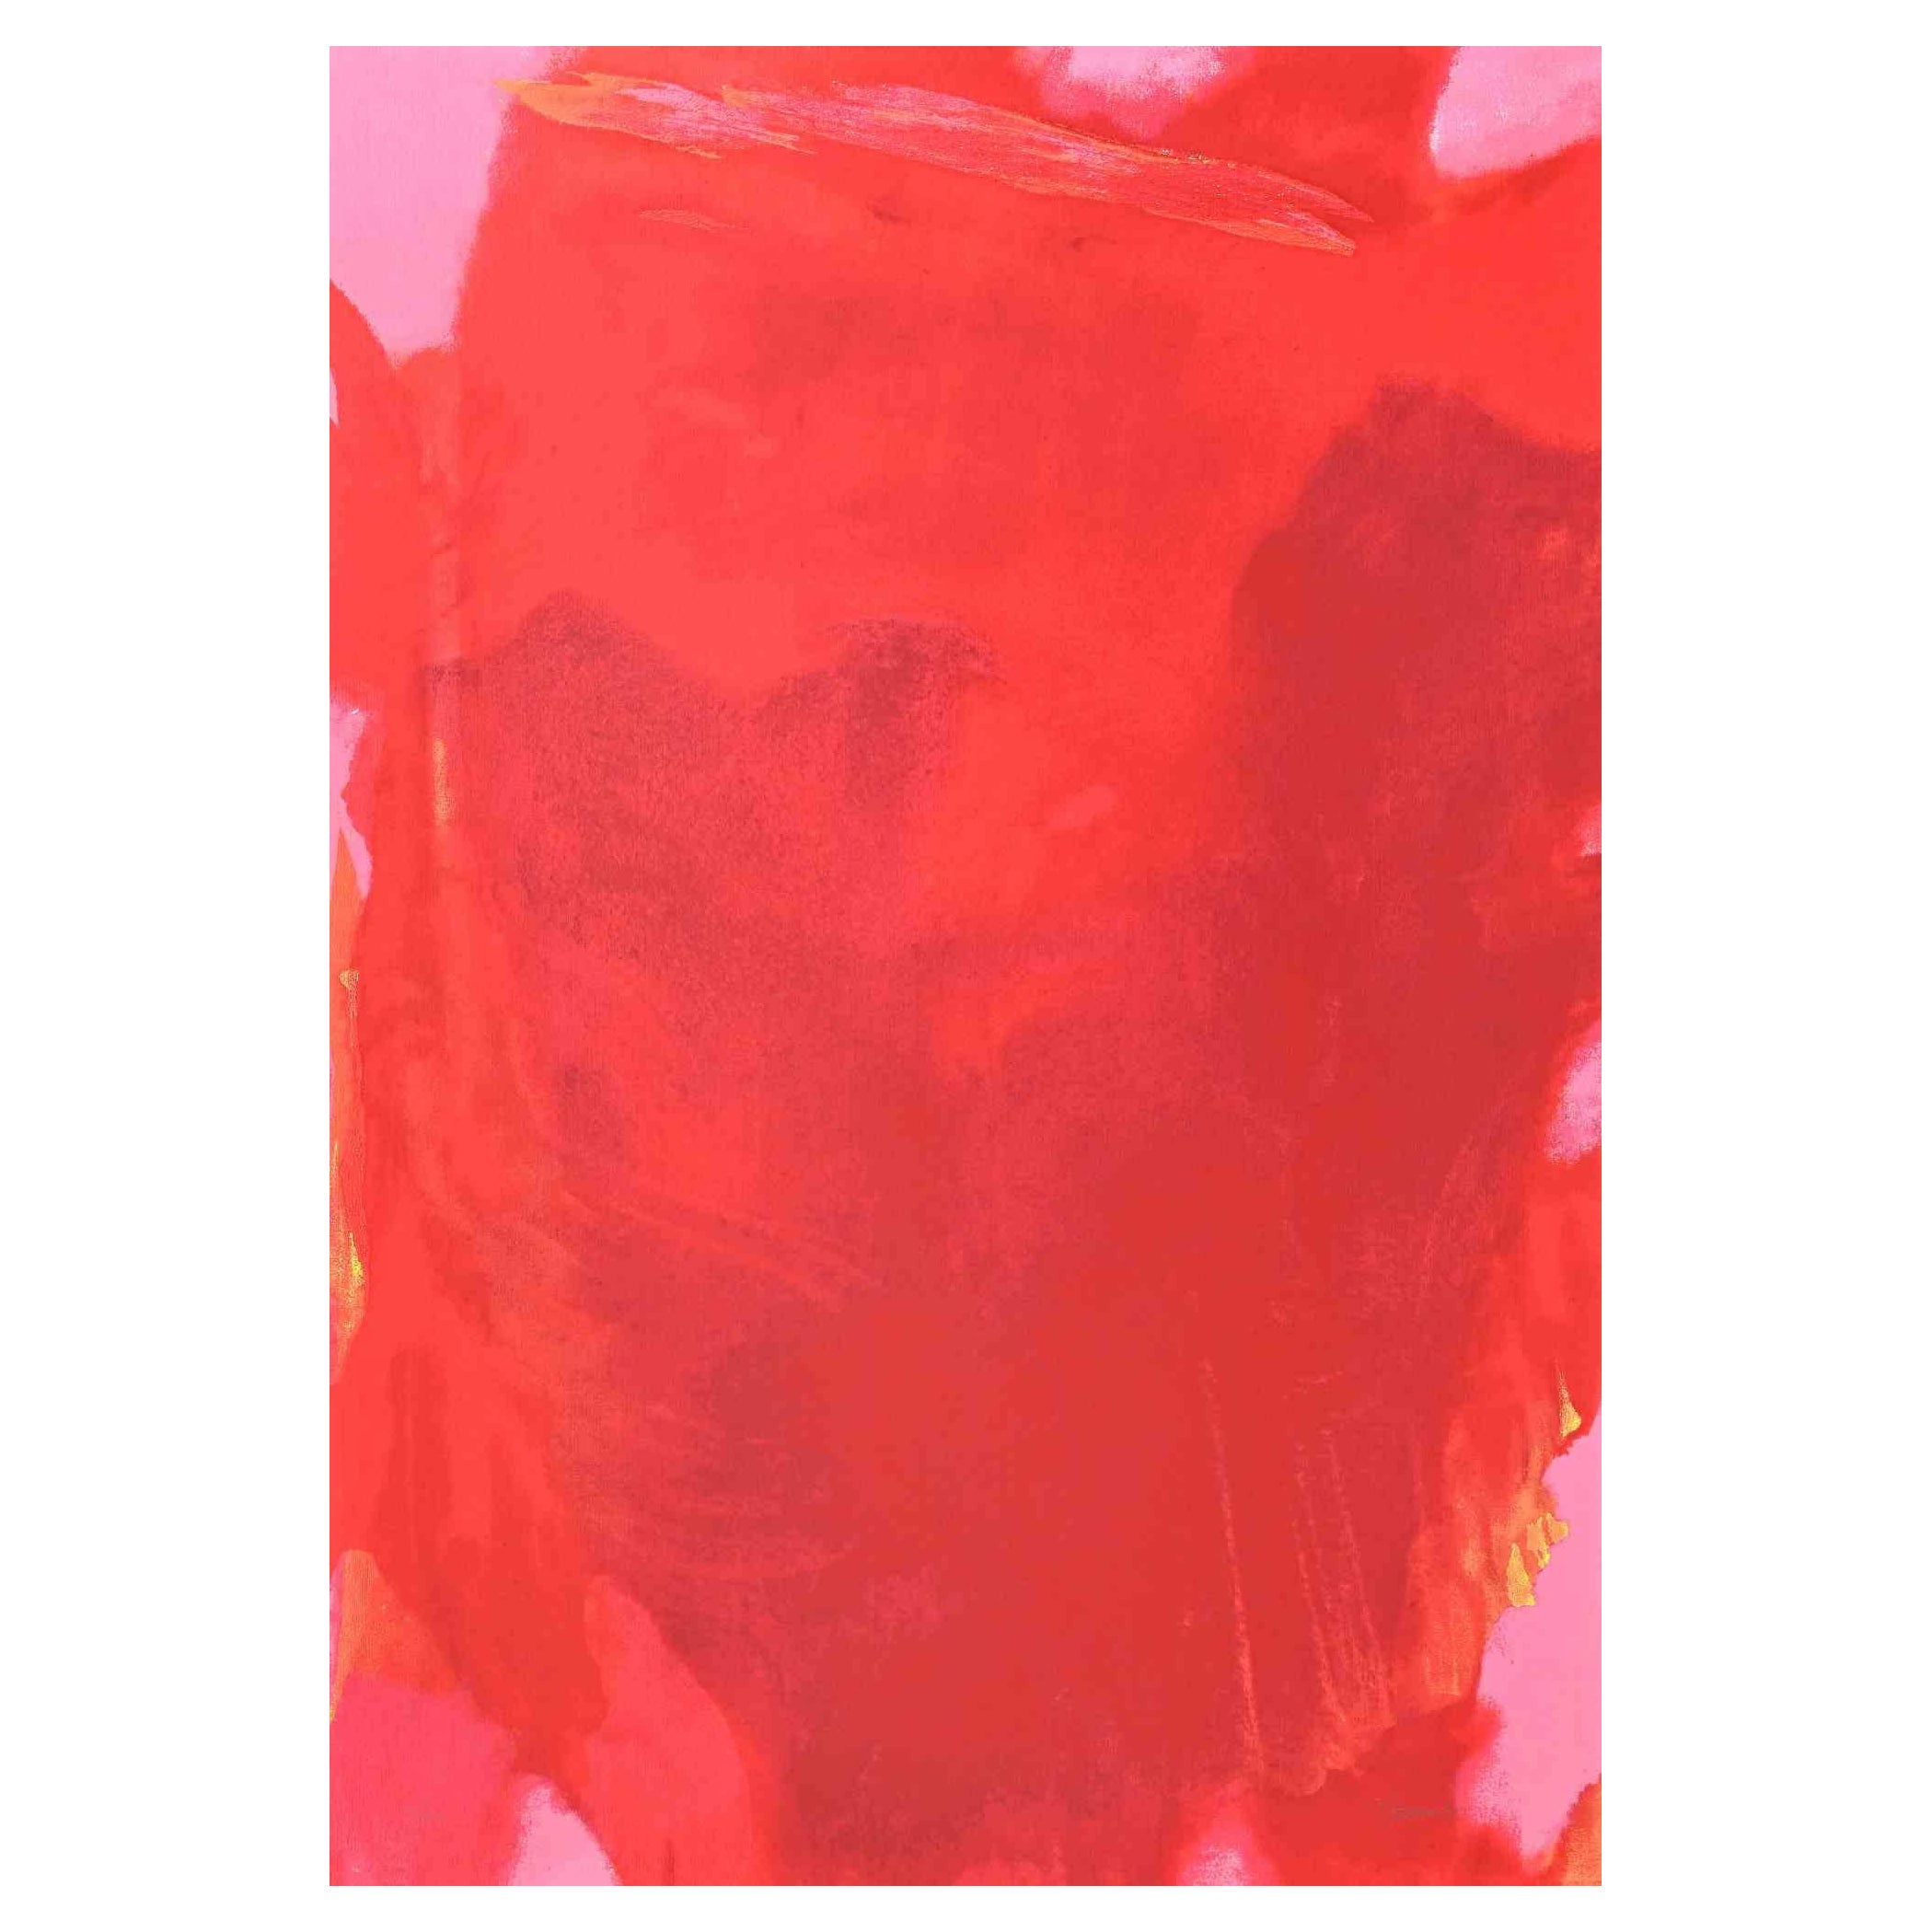 Italo Bressan Abstract Print - The Visible of the Invisible - Red Composition -Screenprint by I. Bressan - 1989